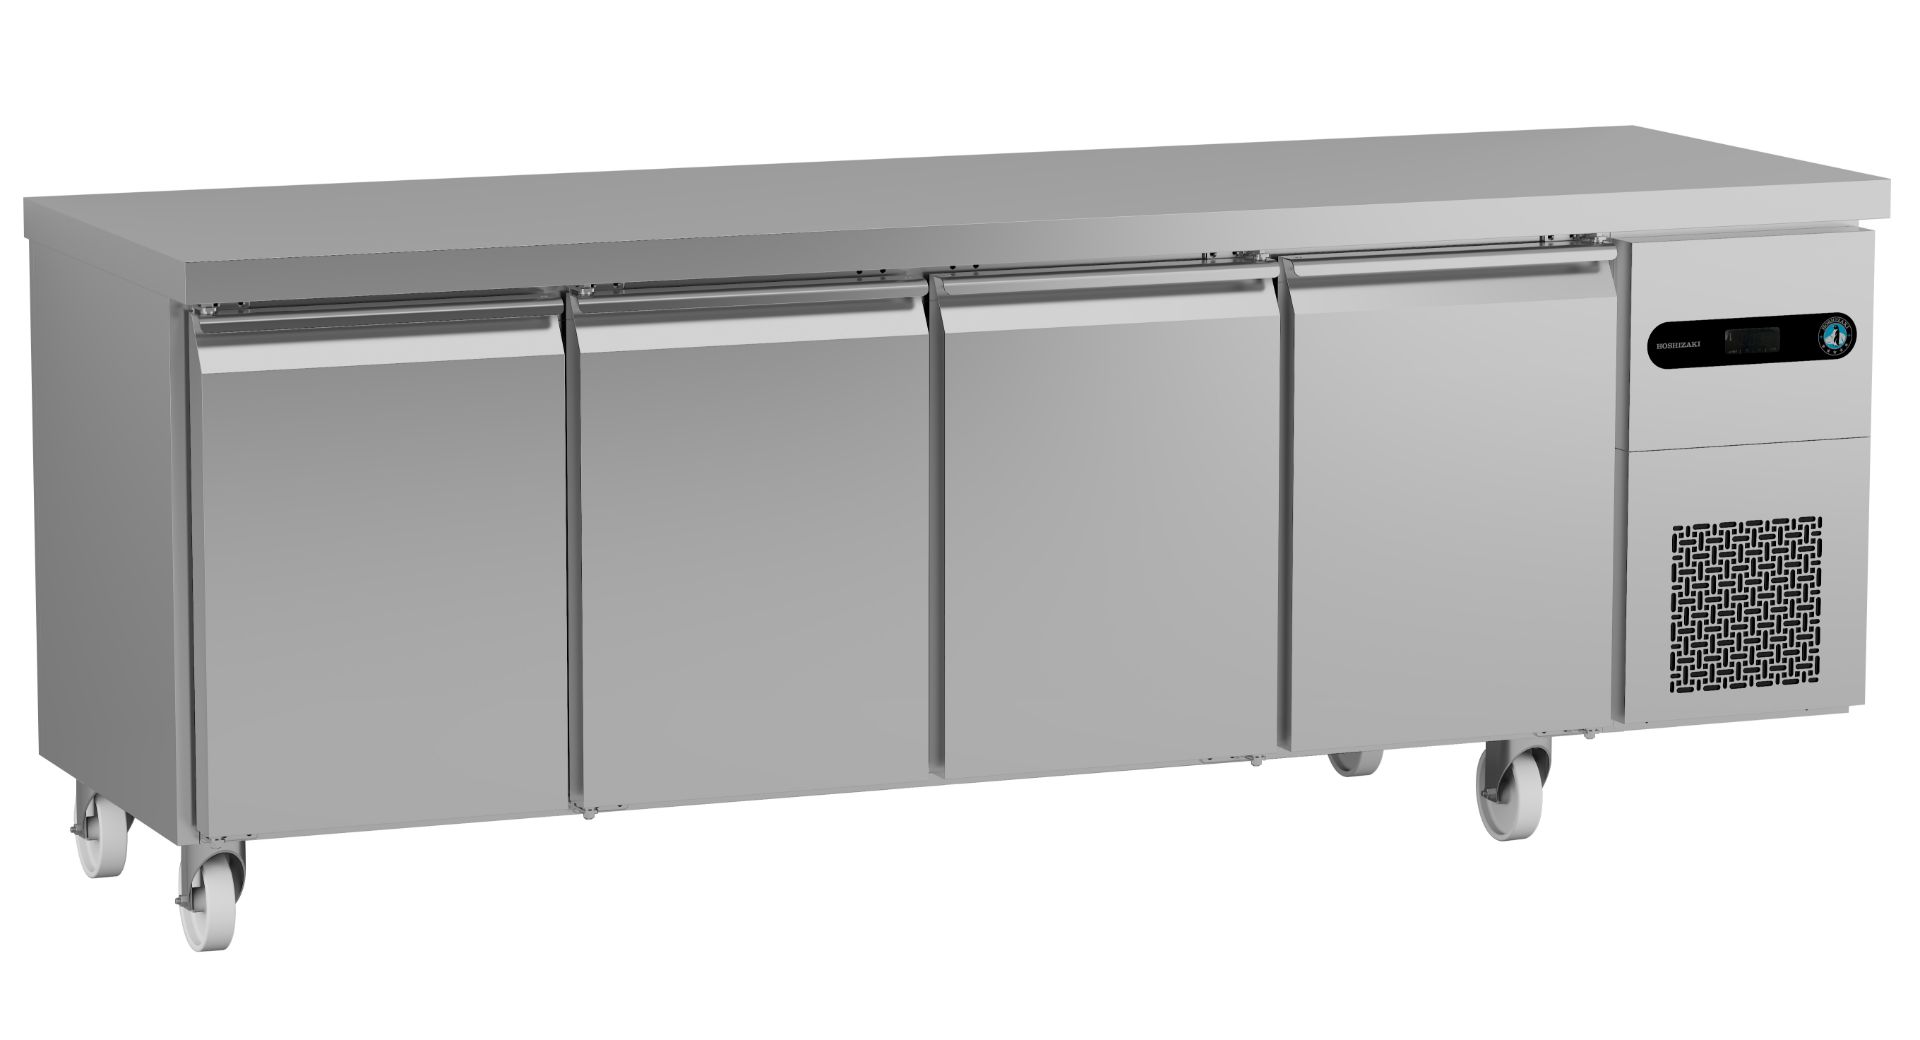 Snowflake Refrigerated Counter SCR-225CHRC-2222-C1